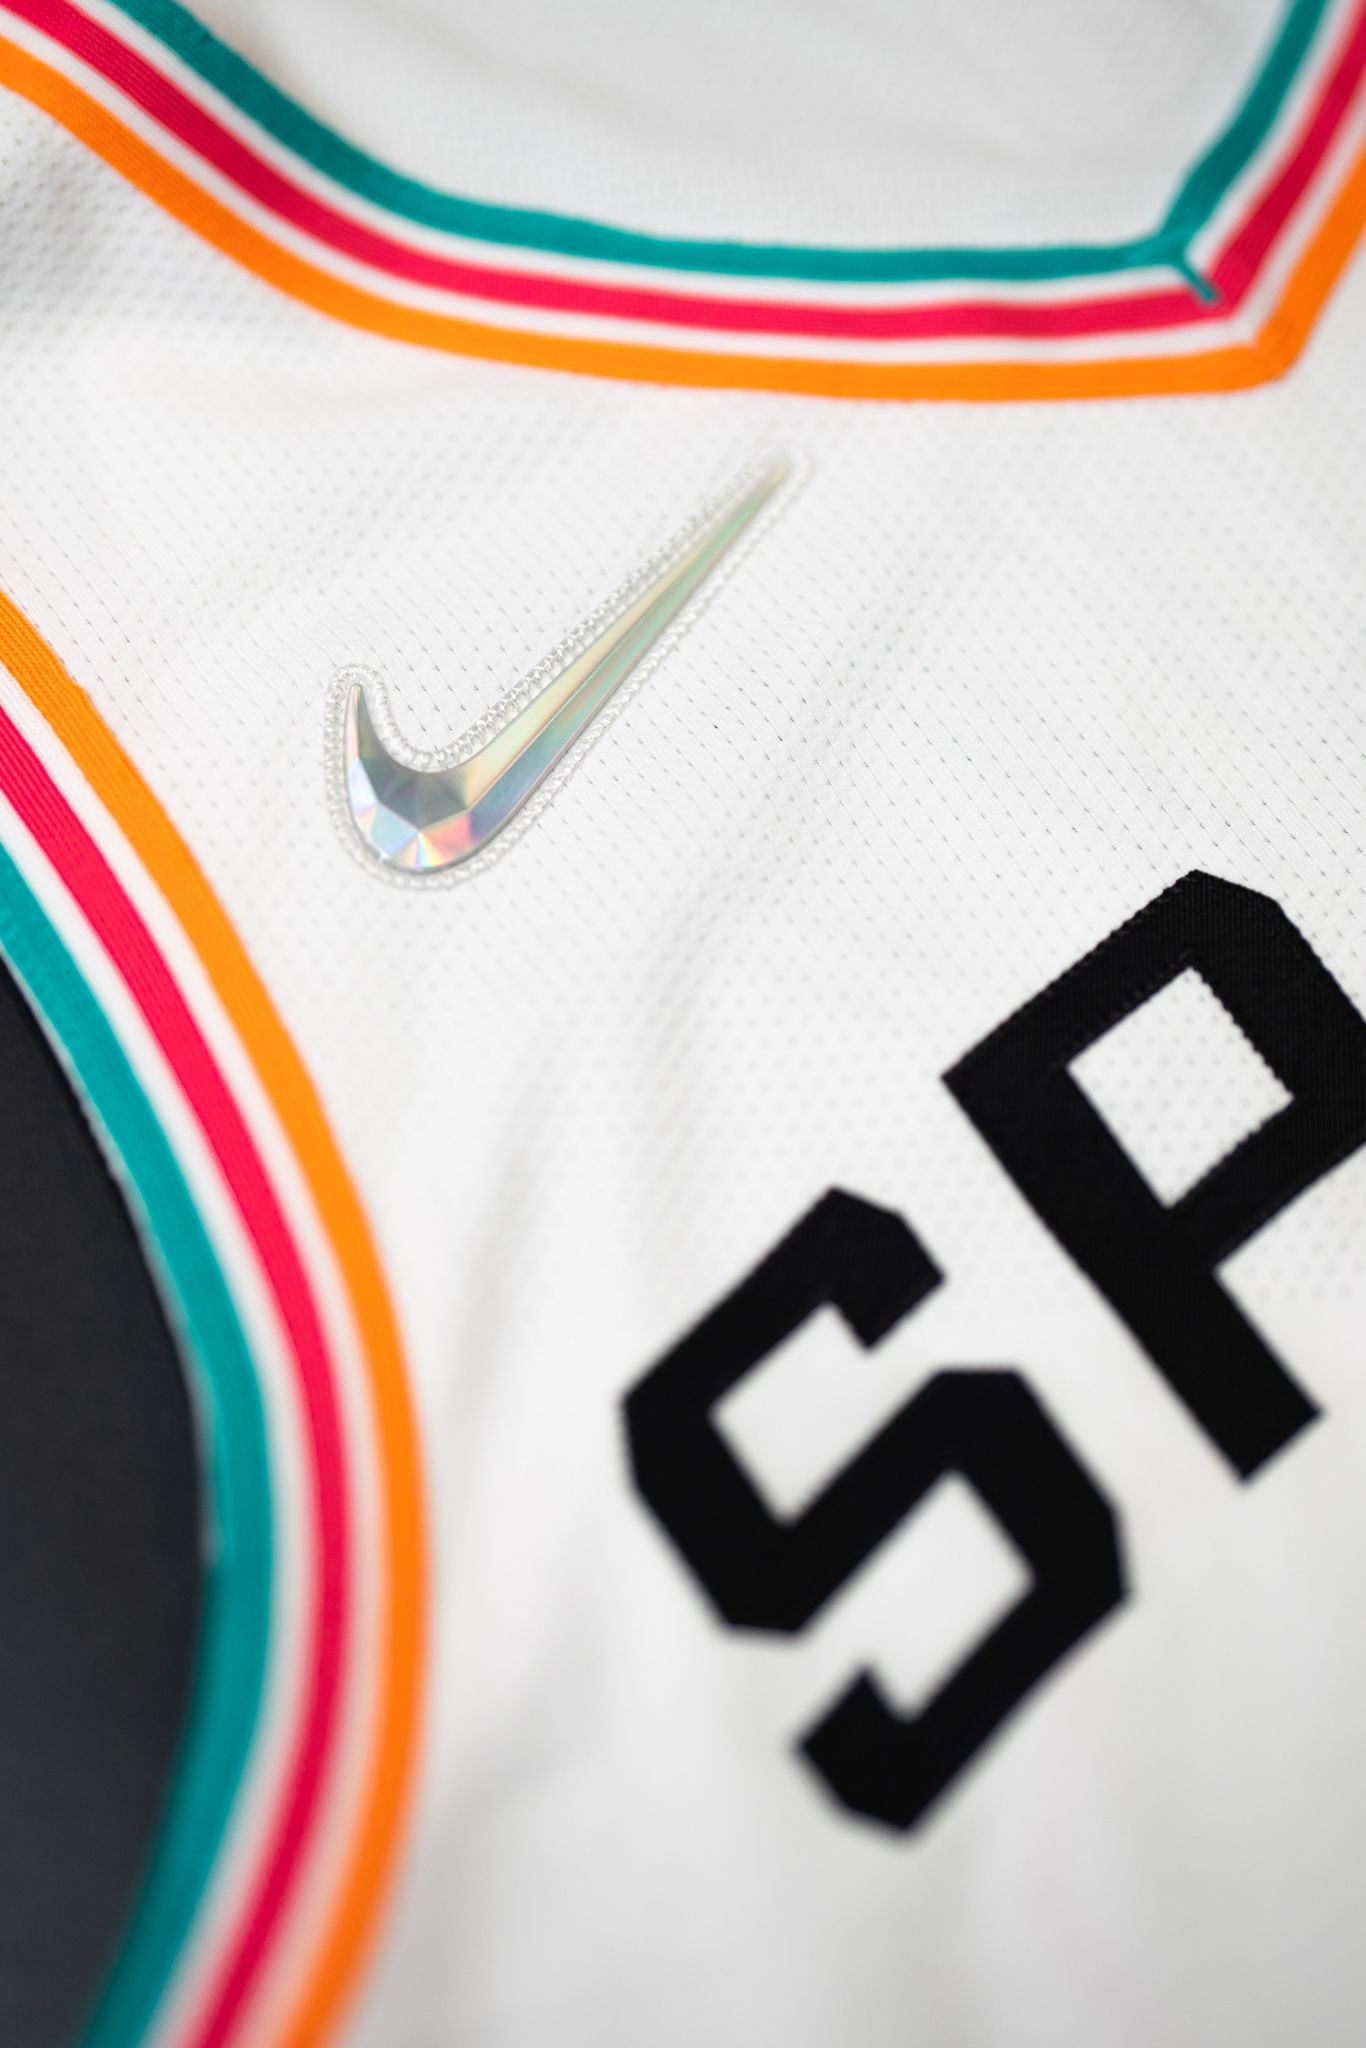 SPURS UNVEIL FIESTA-THEMED NIKE CITY EDITION UNIFORMS AHEAD OF